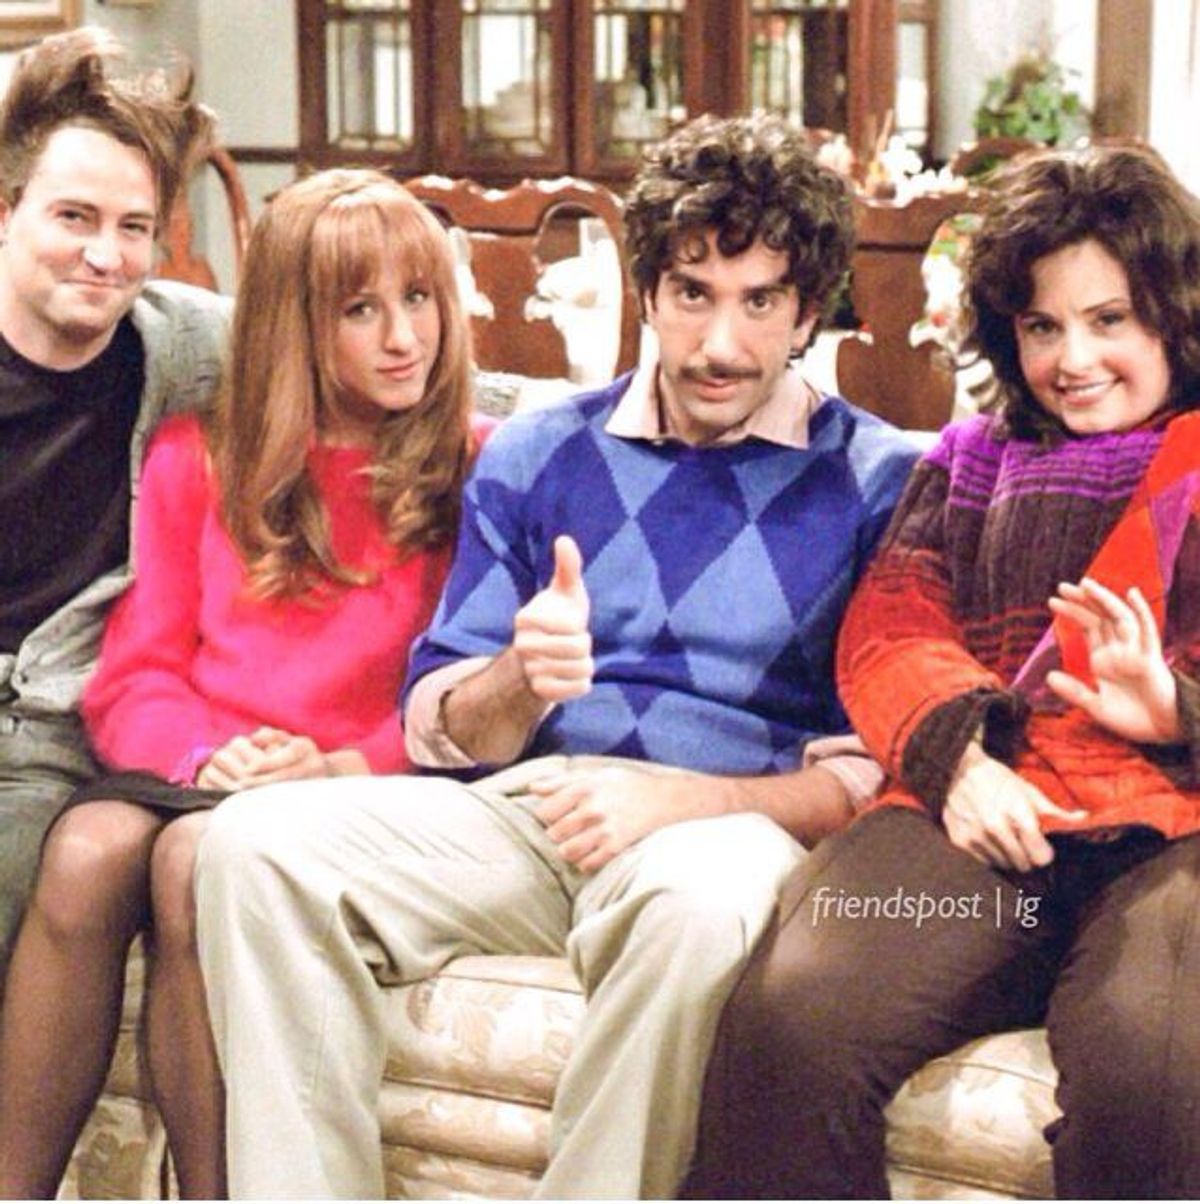 If The Cast Of "Friends" Were Oakland University Students